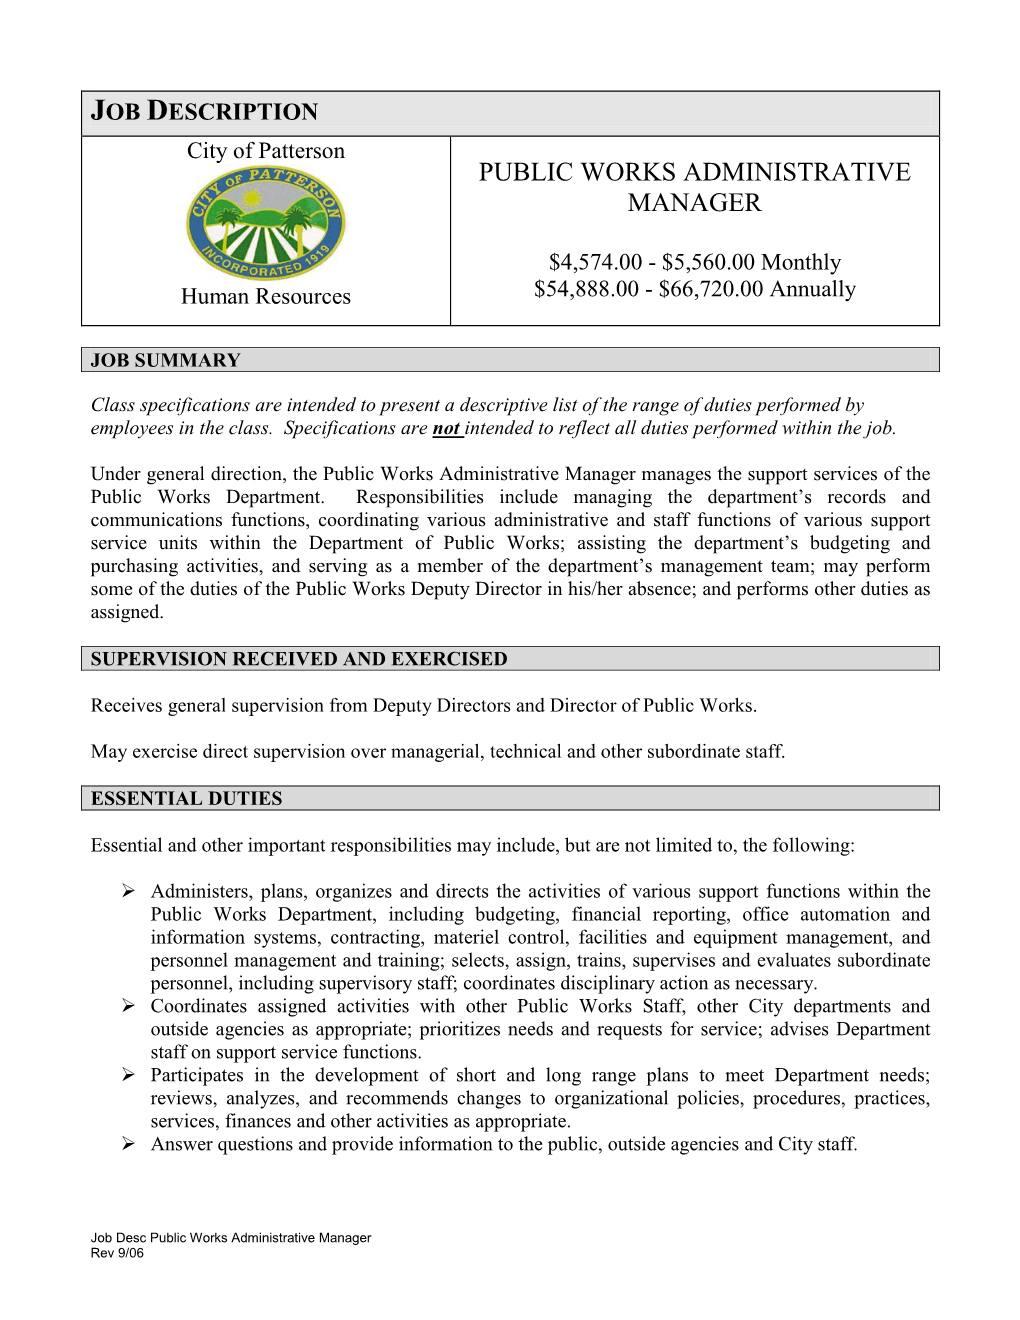 Public Works Administrative Manager